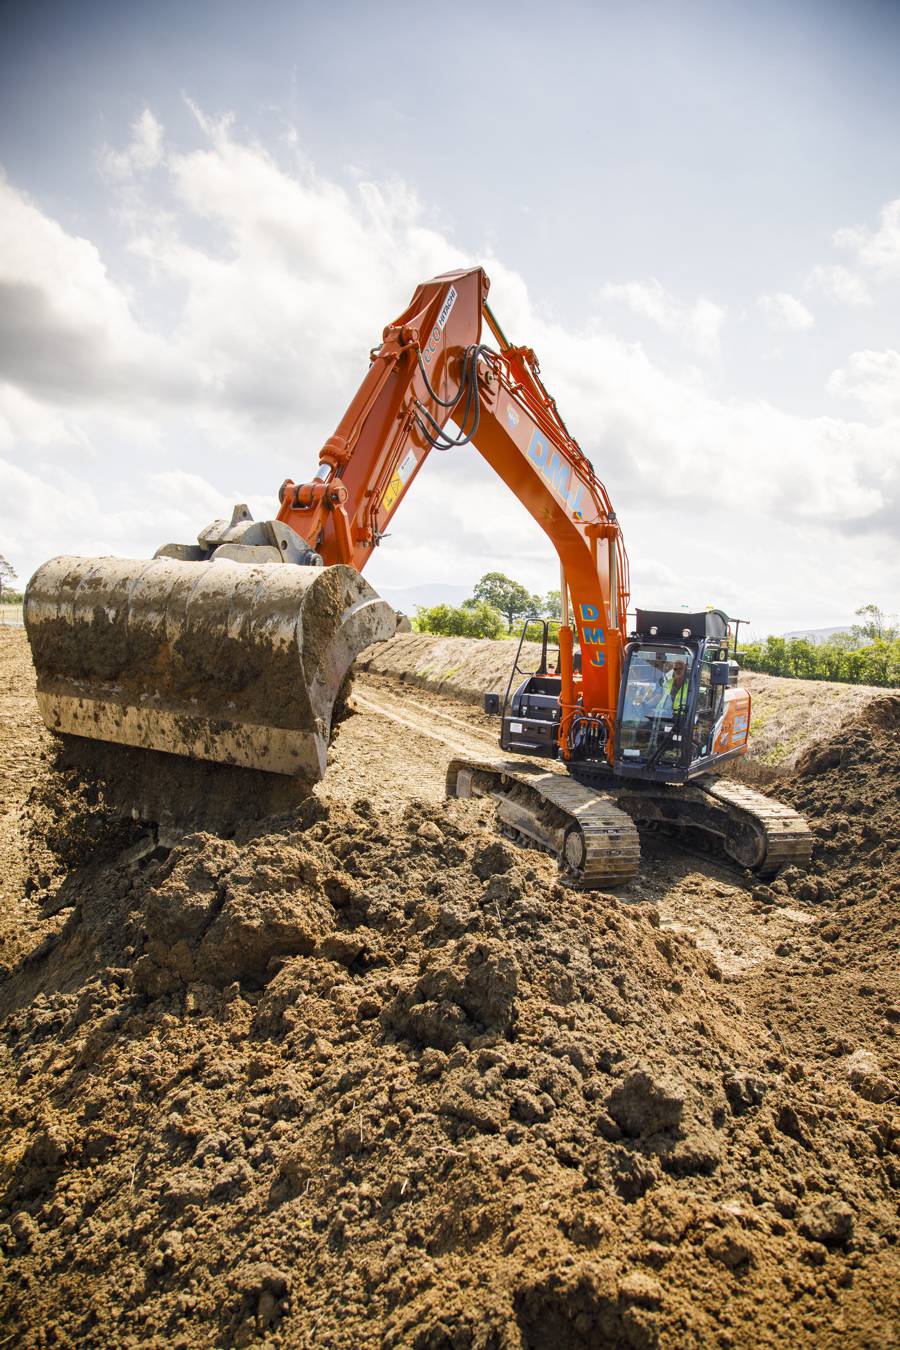 Hitachi's cab comfort a big hit with UK's first Zaxis-7 Excavator operators